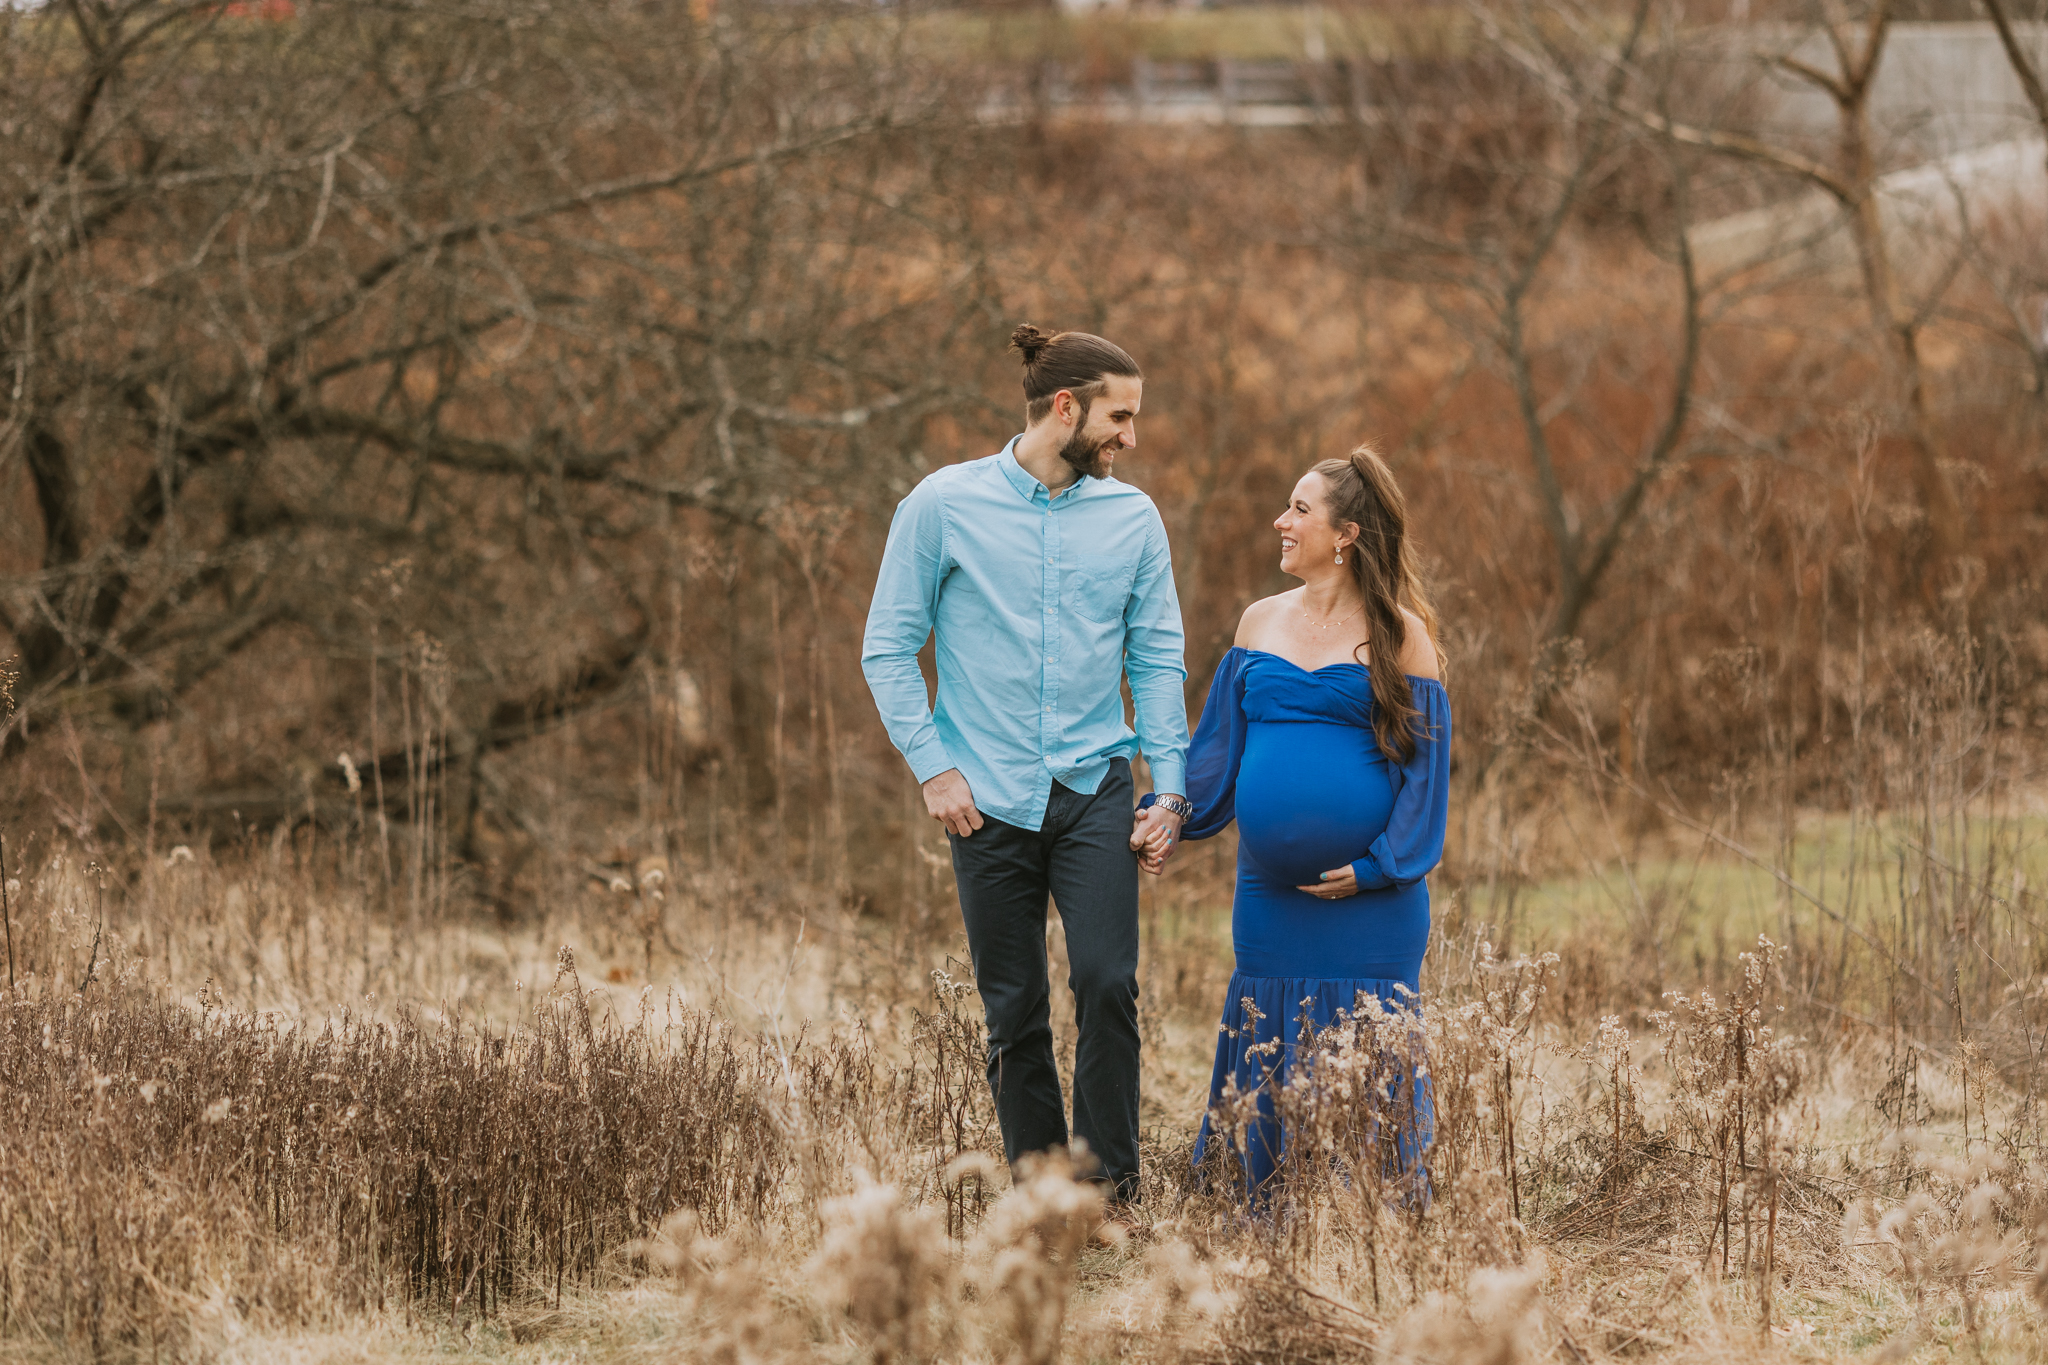 Couple walking at Pittsburgh outdoor field maternity session | Kelly Adrienne Photography